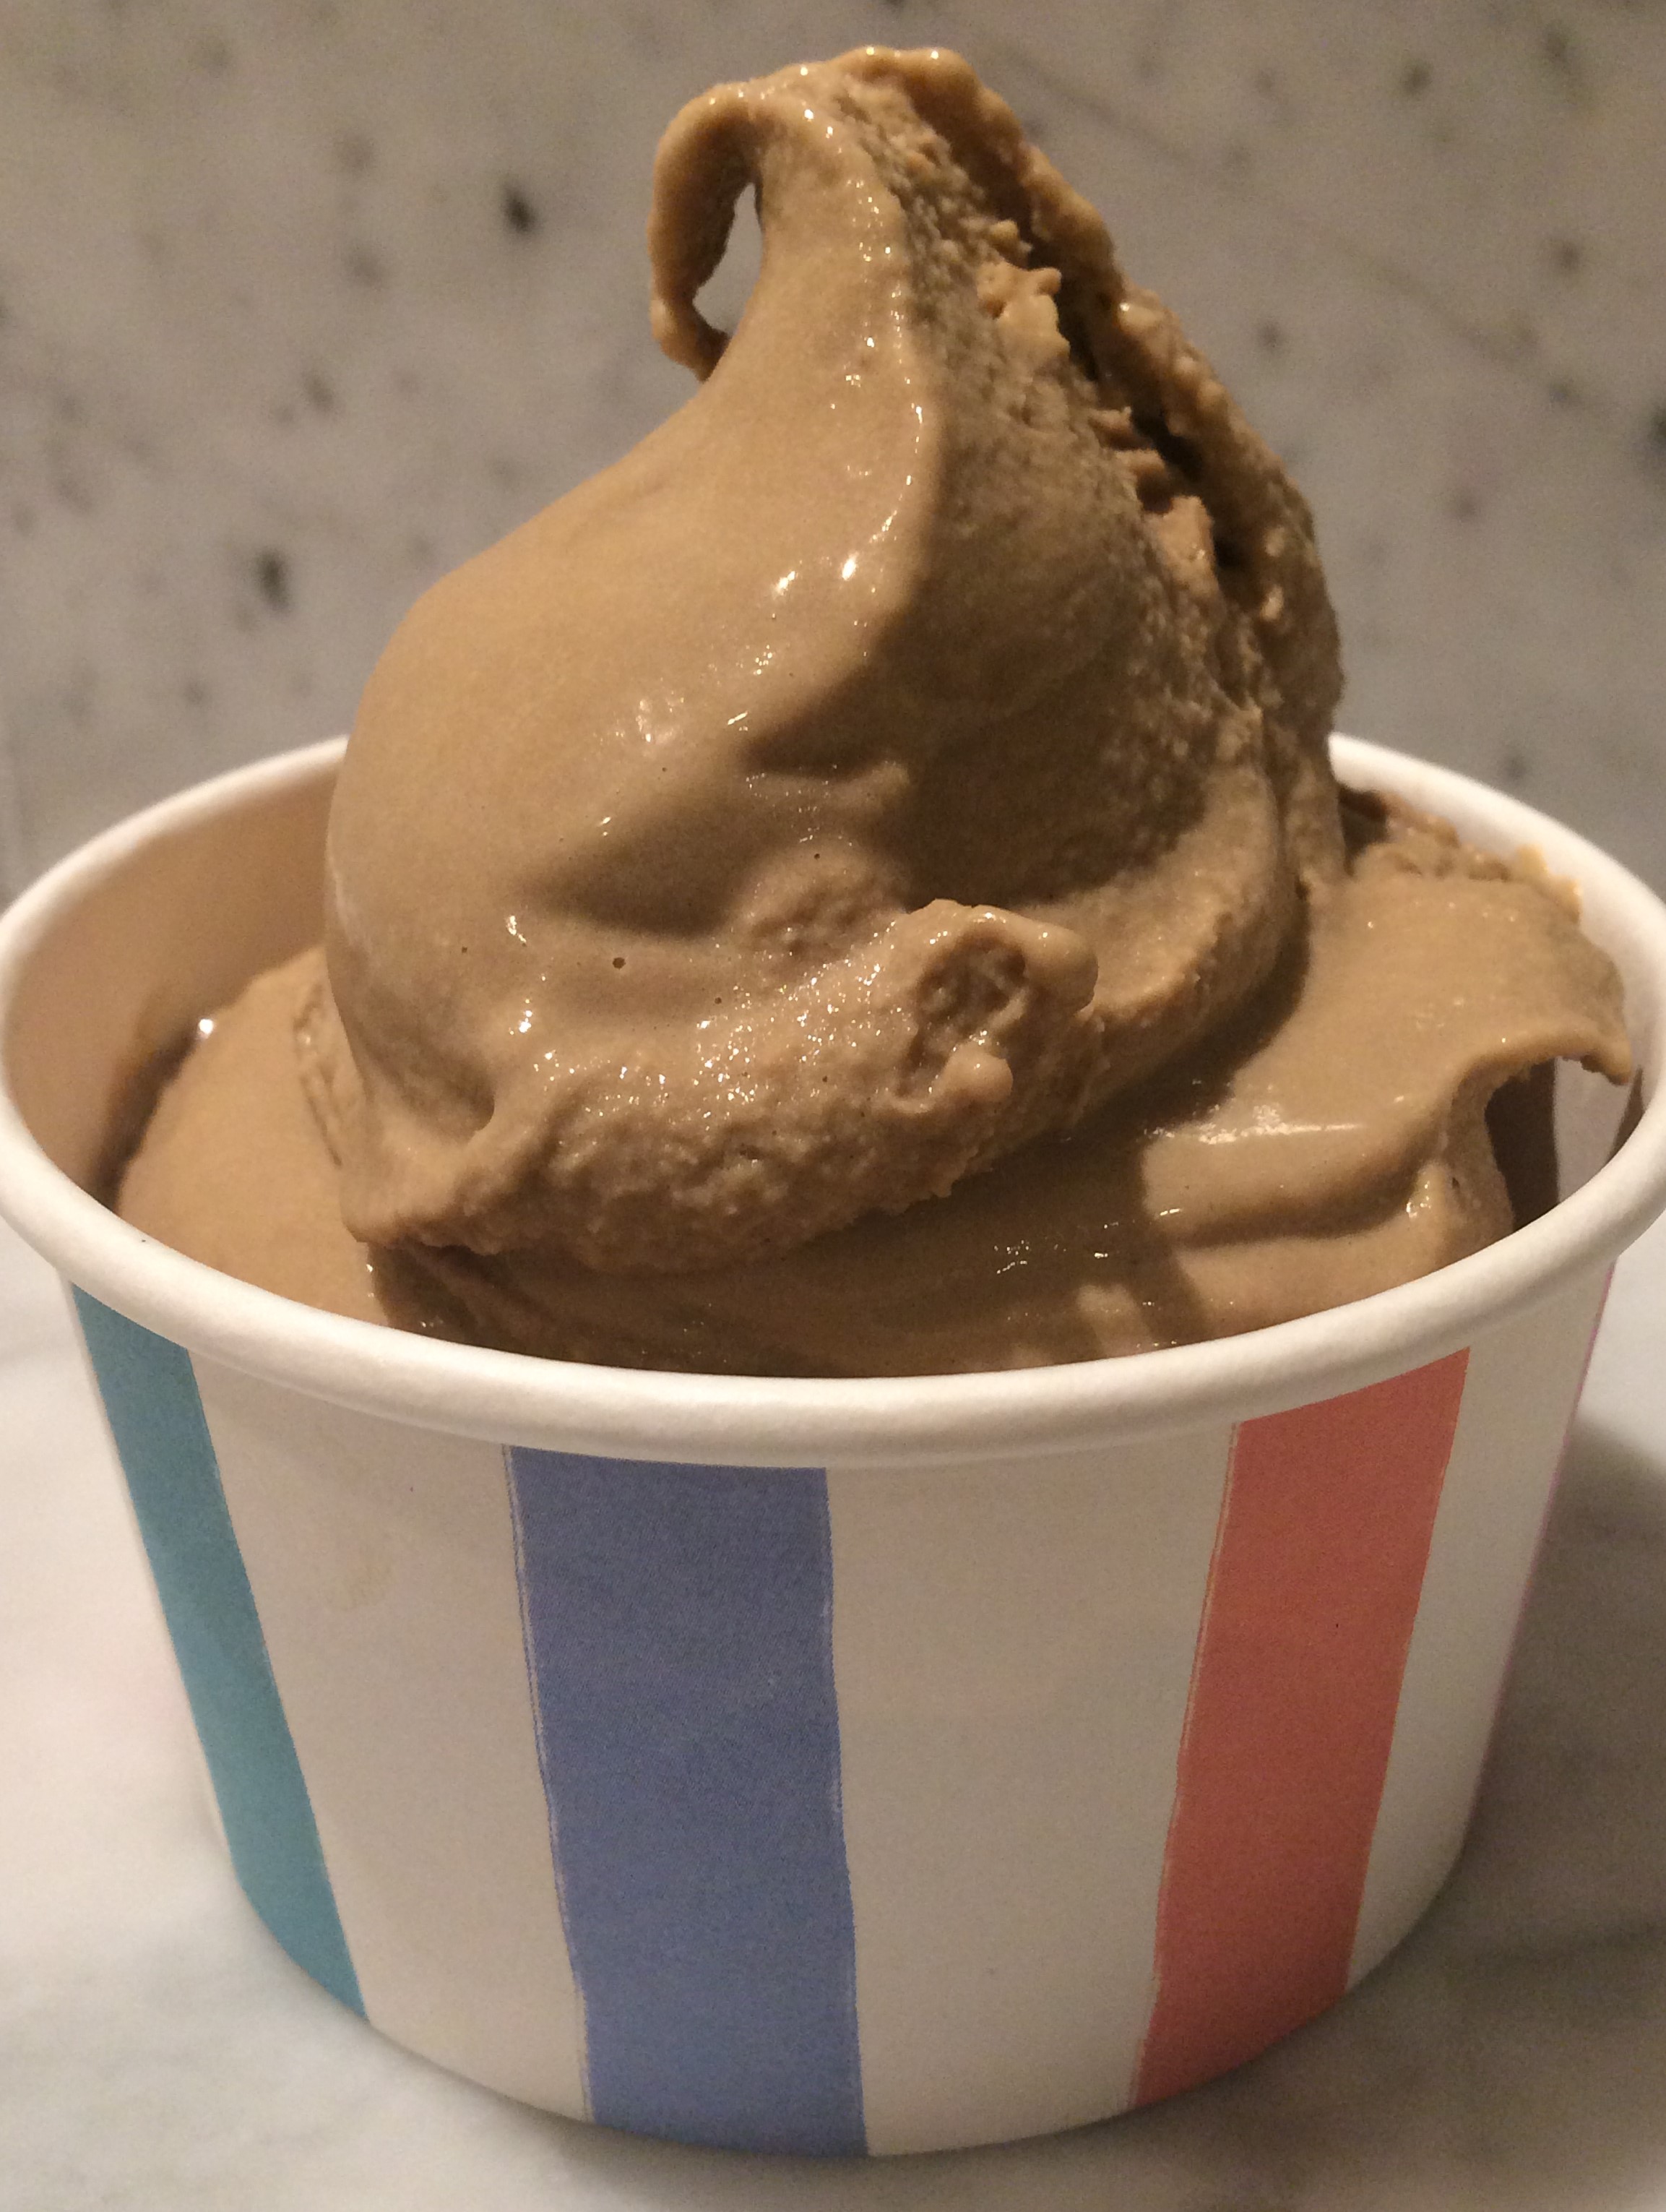 Dairy Free Coffee Ice Cream featured